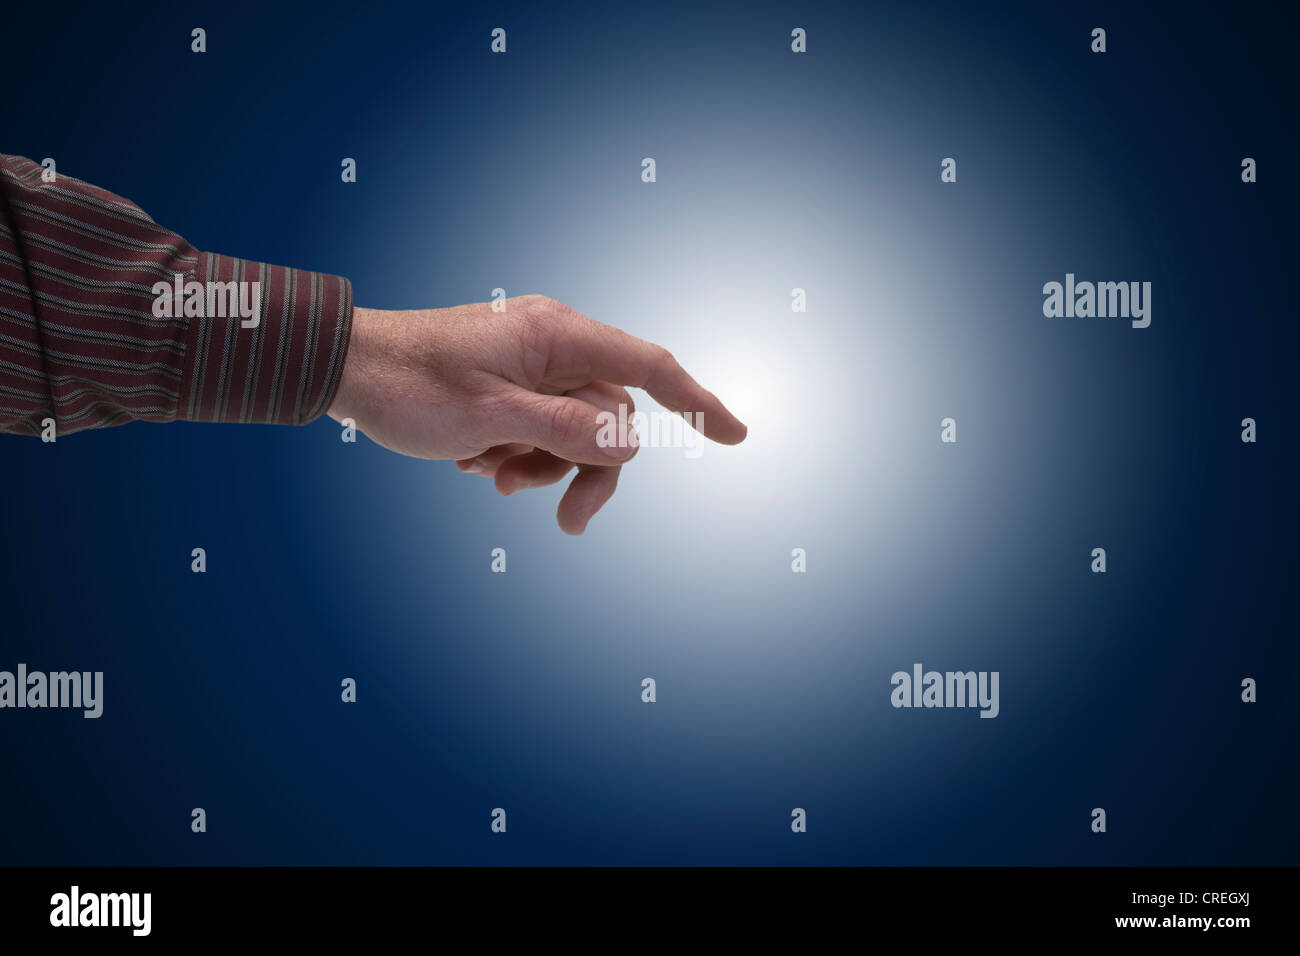 Hand Finger Pointing Touching With Glow Stock Photo